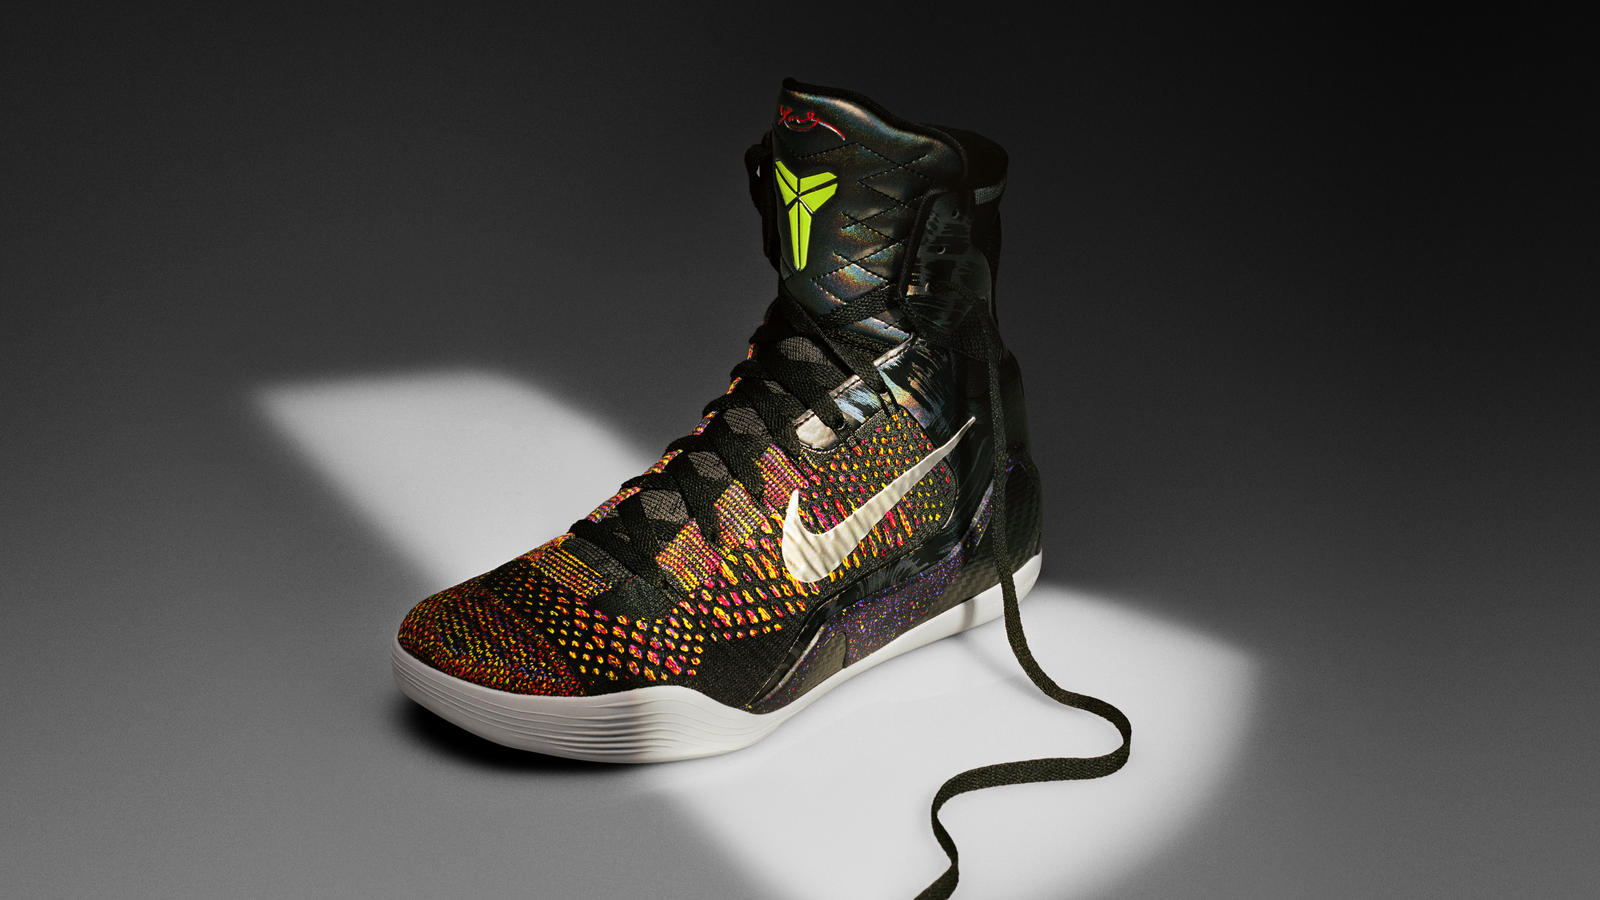 Nike Redifines Basketball Footwear With the Kobe Elite Featuring